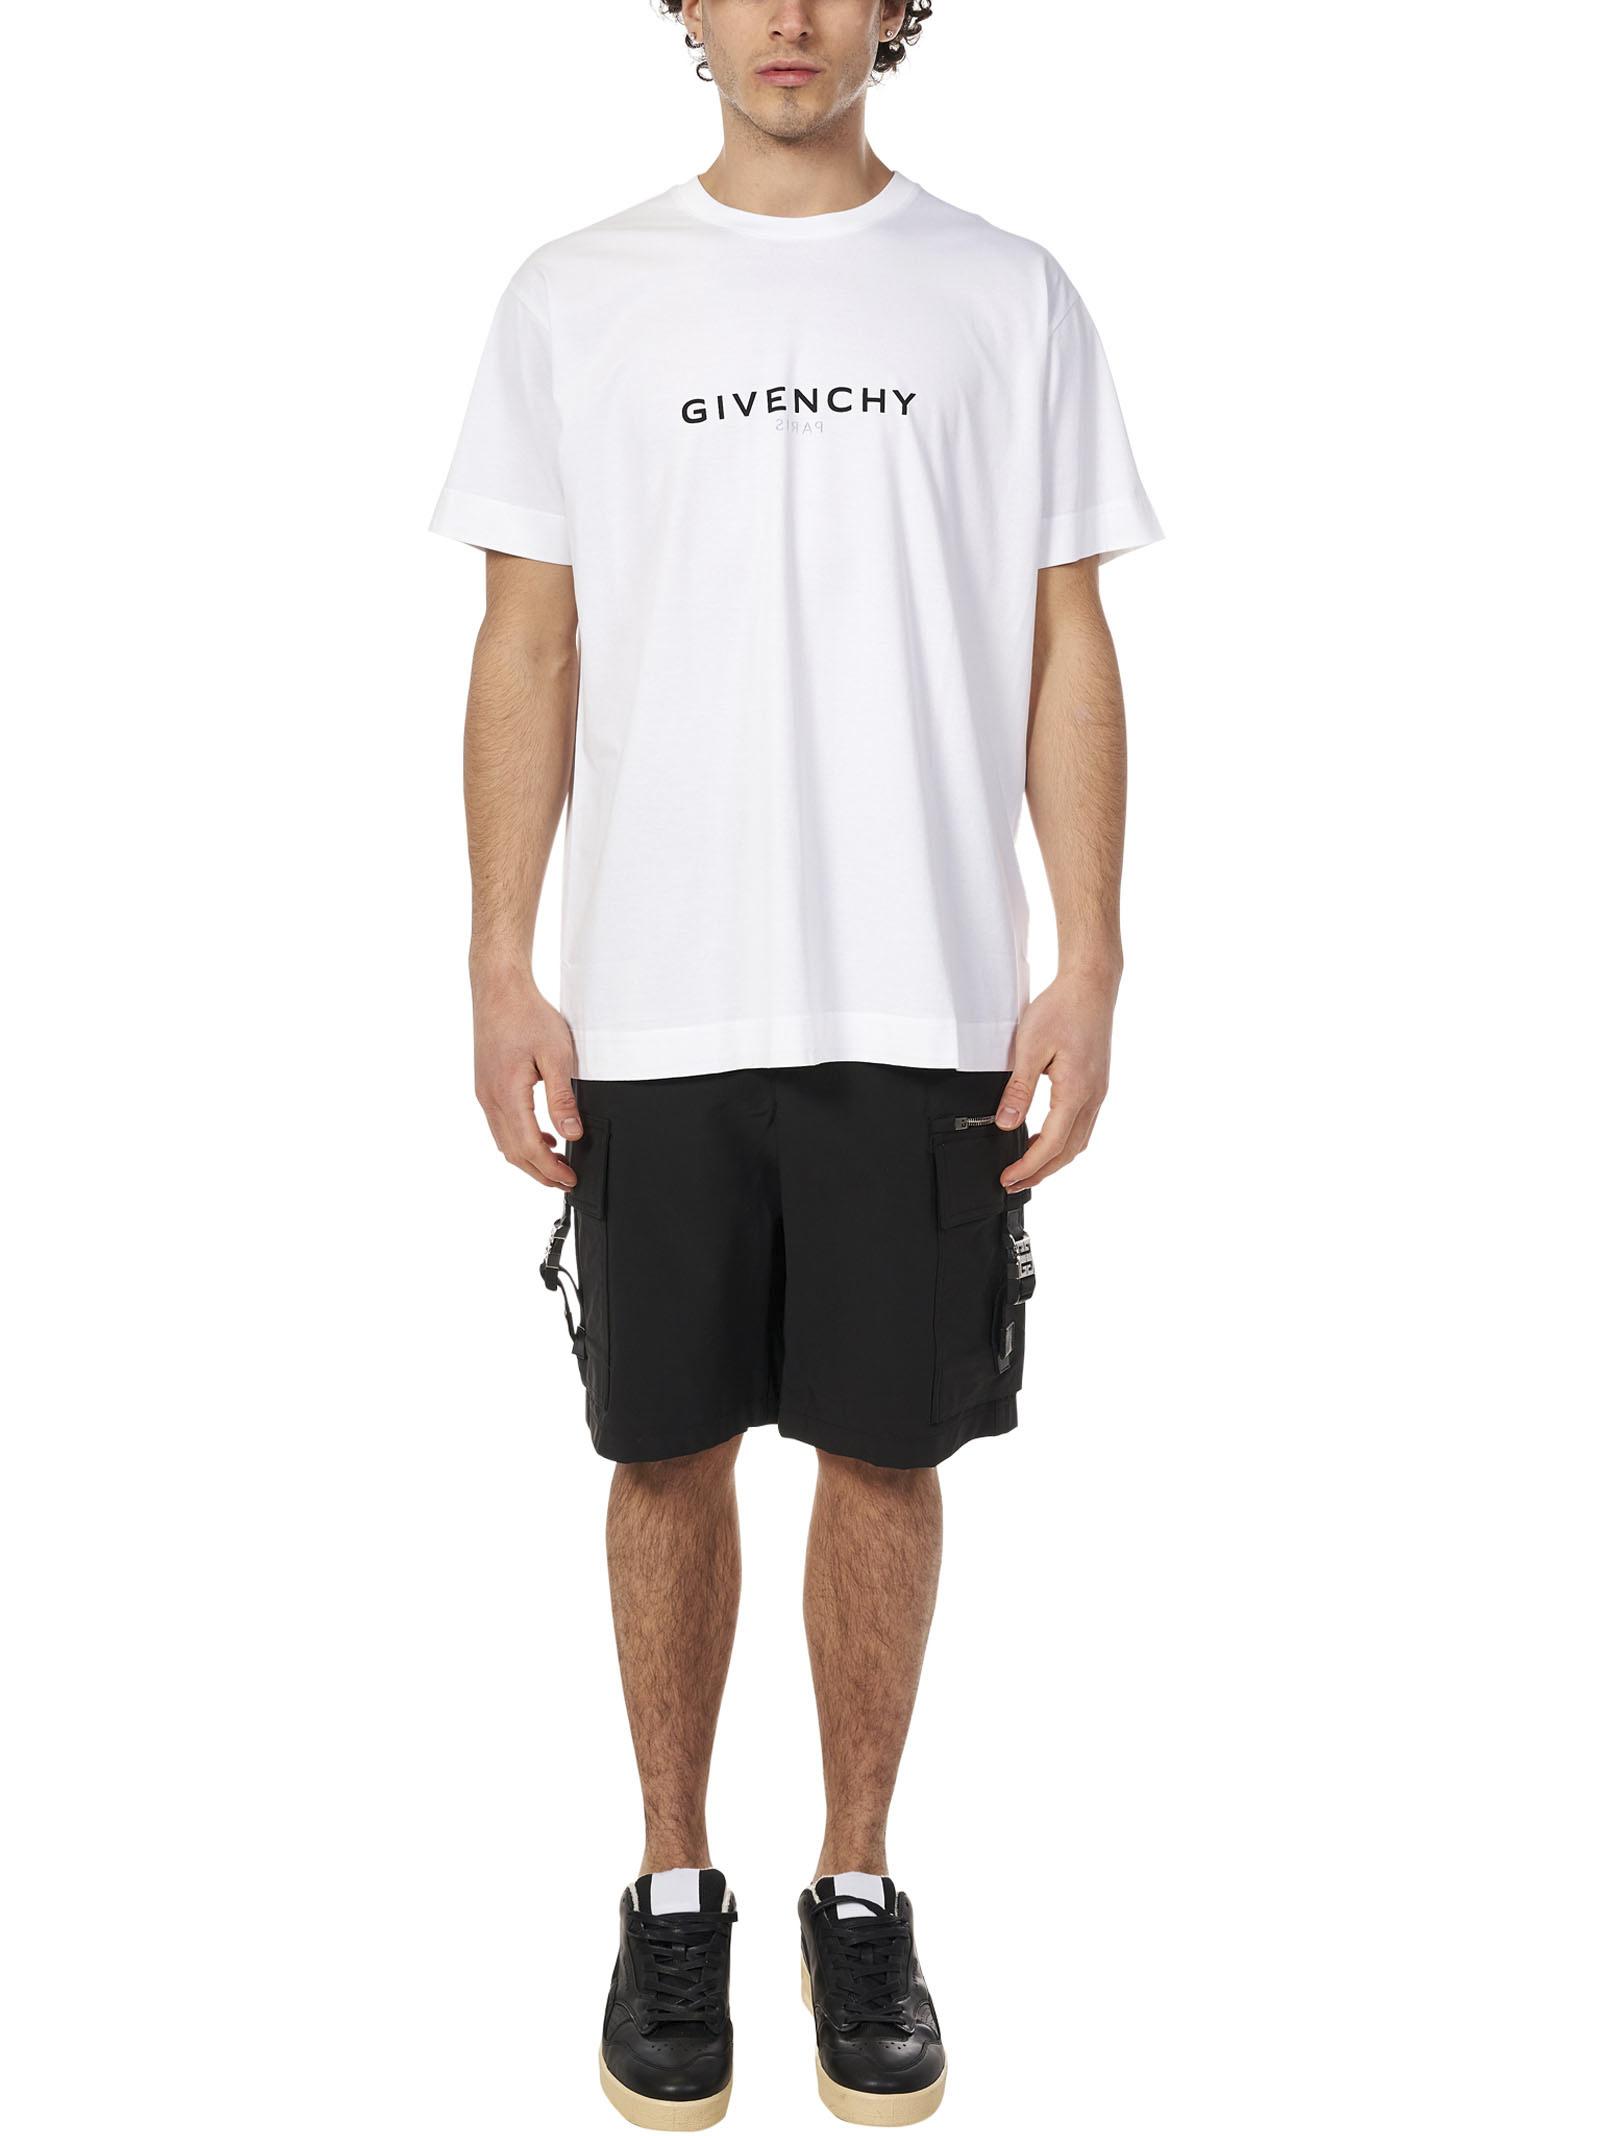 Givenchy Cotton Reverset-shirt in White for Men - Lyst